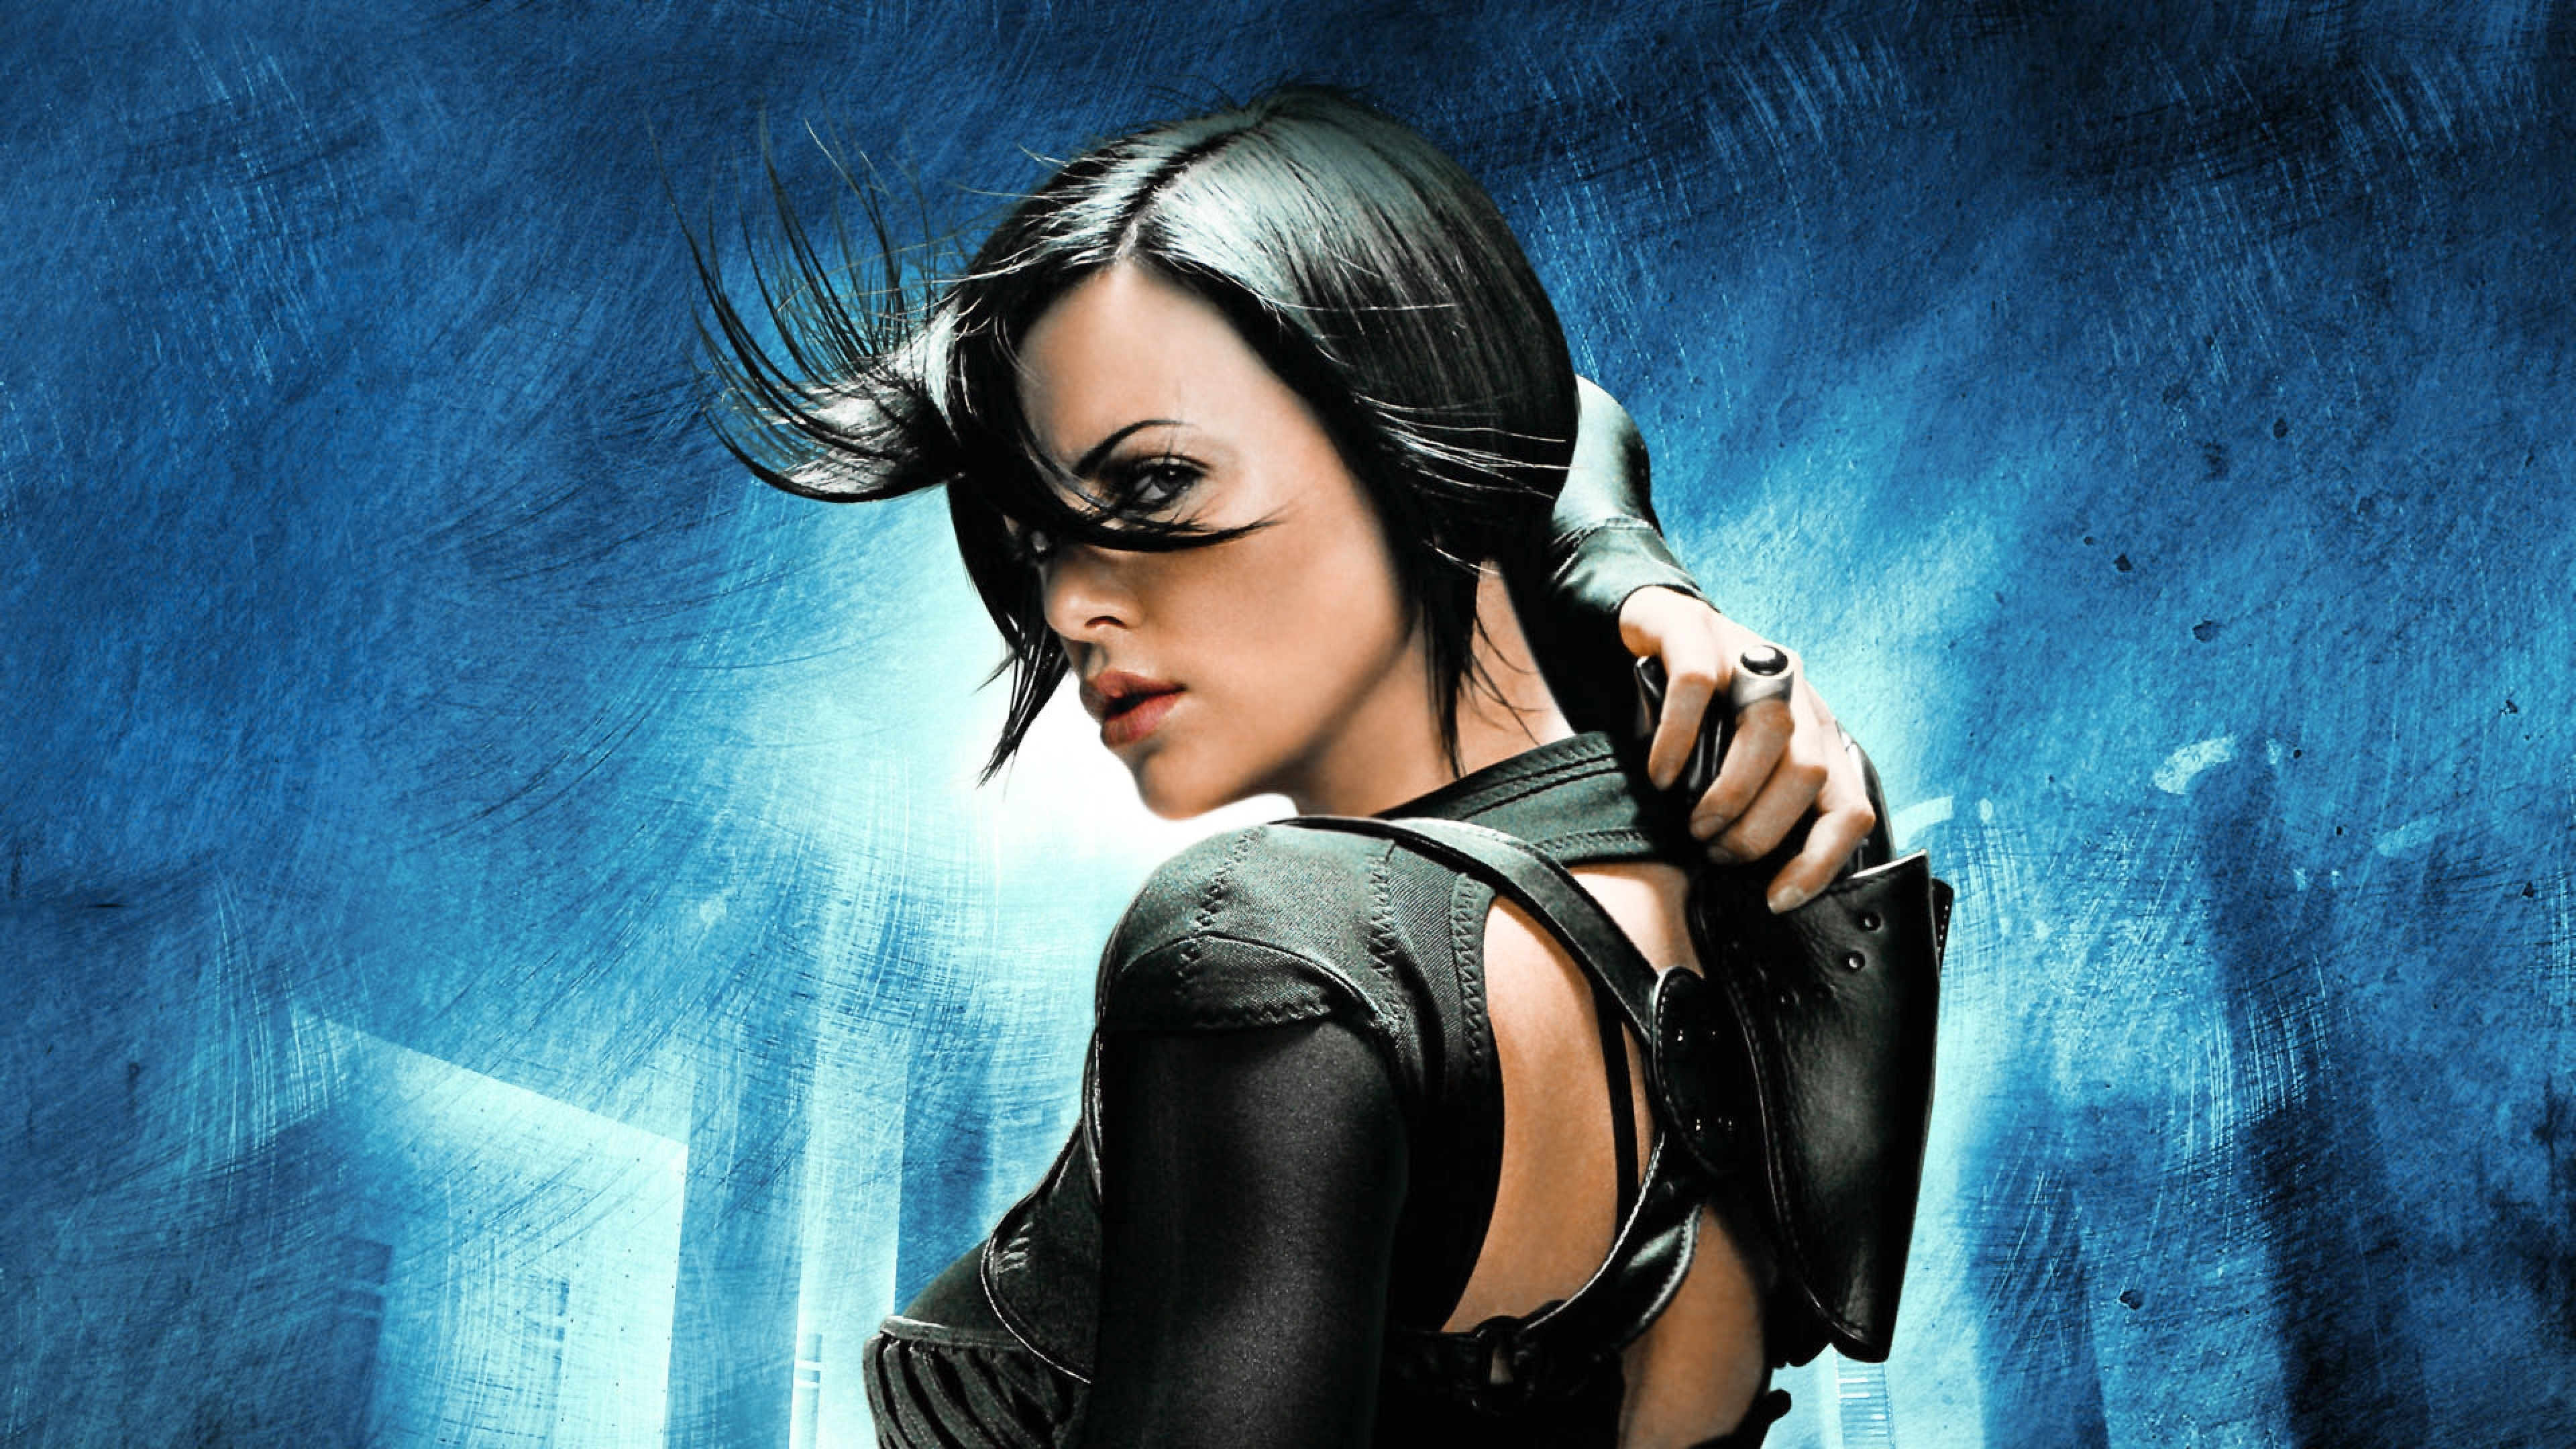 3840x2160  Wallpaper aeon flux, Ã¦on flux, charlize theron, girl, actress